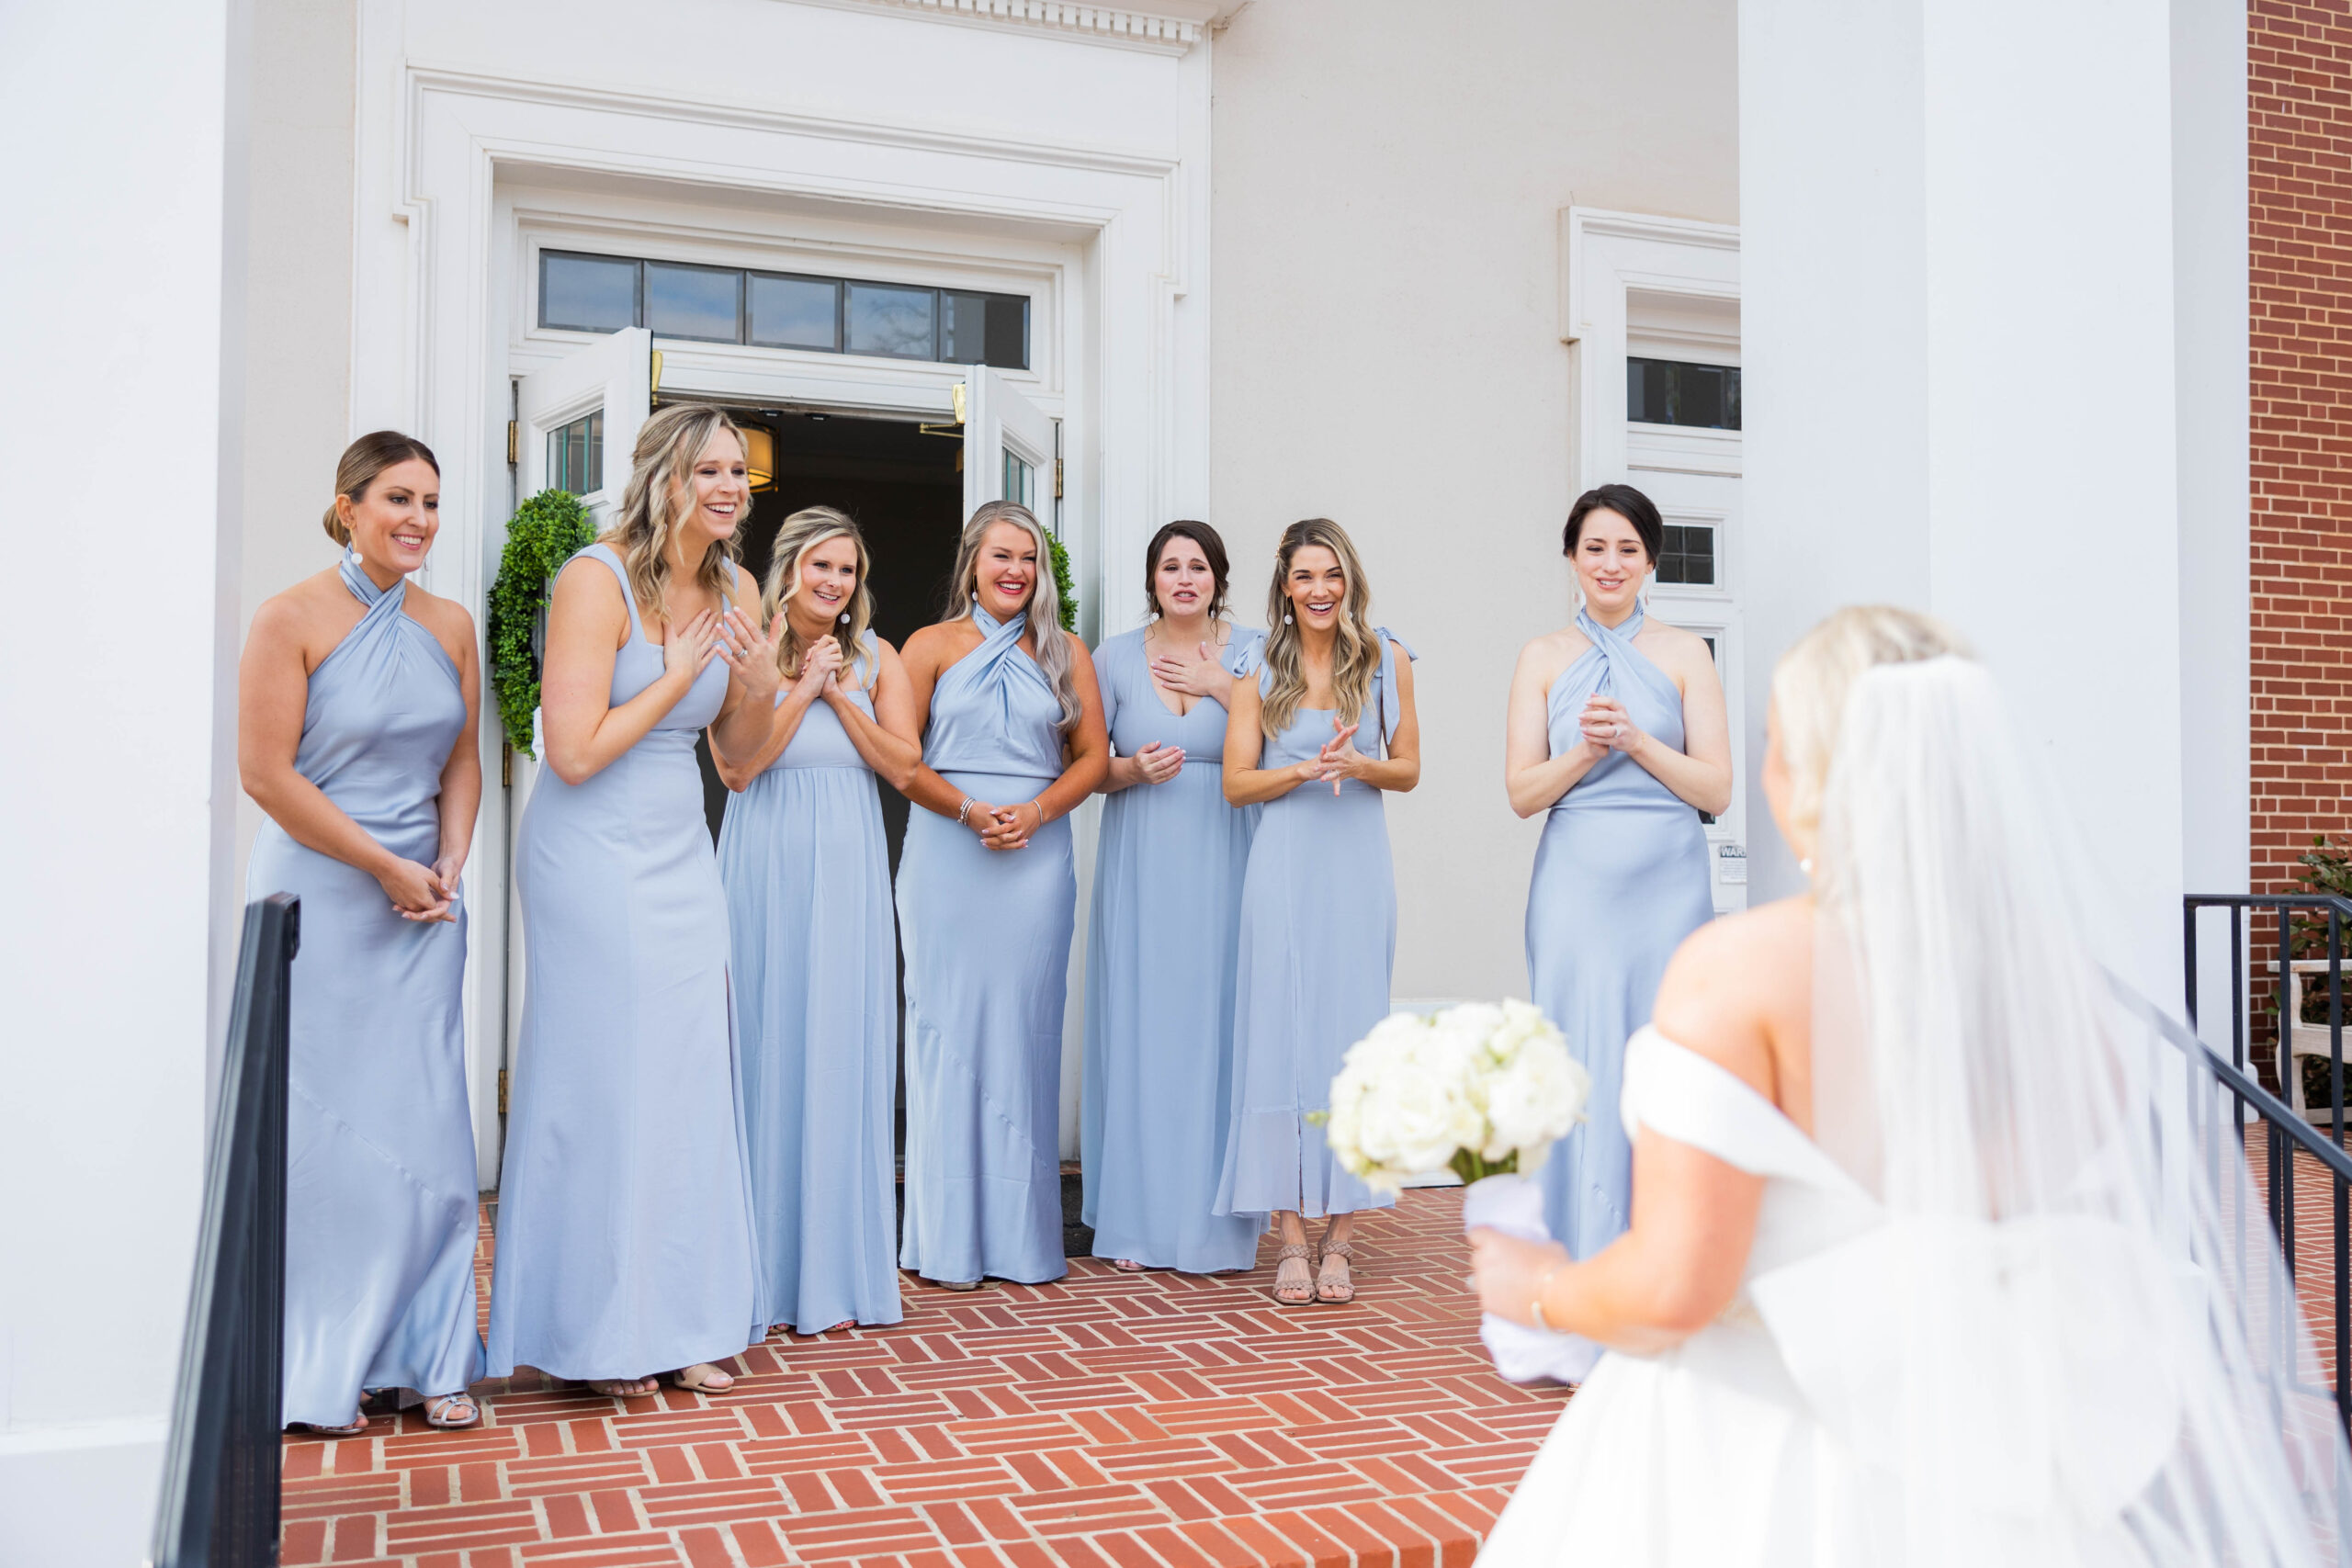 Eleanor Stenner Photography - a wedding photographer in Birmingham, AL - shares tips on how to be the best Maid of Honor!